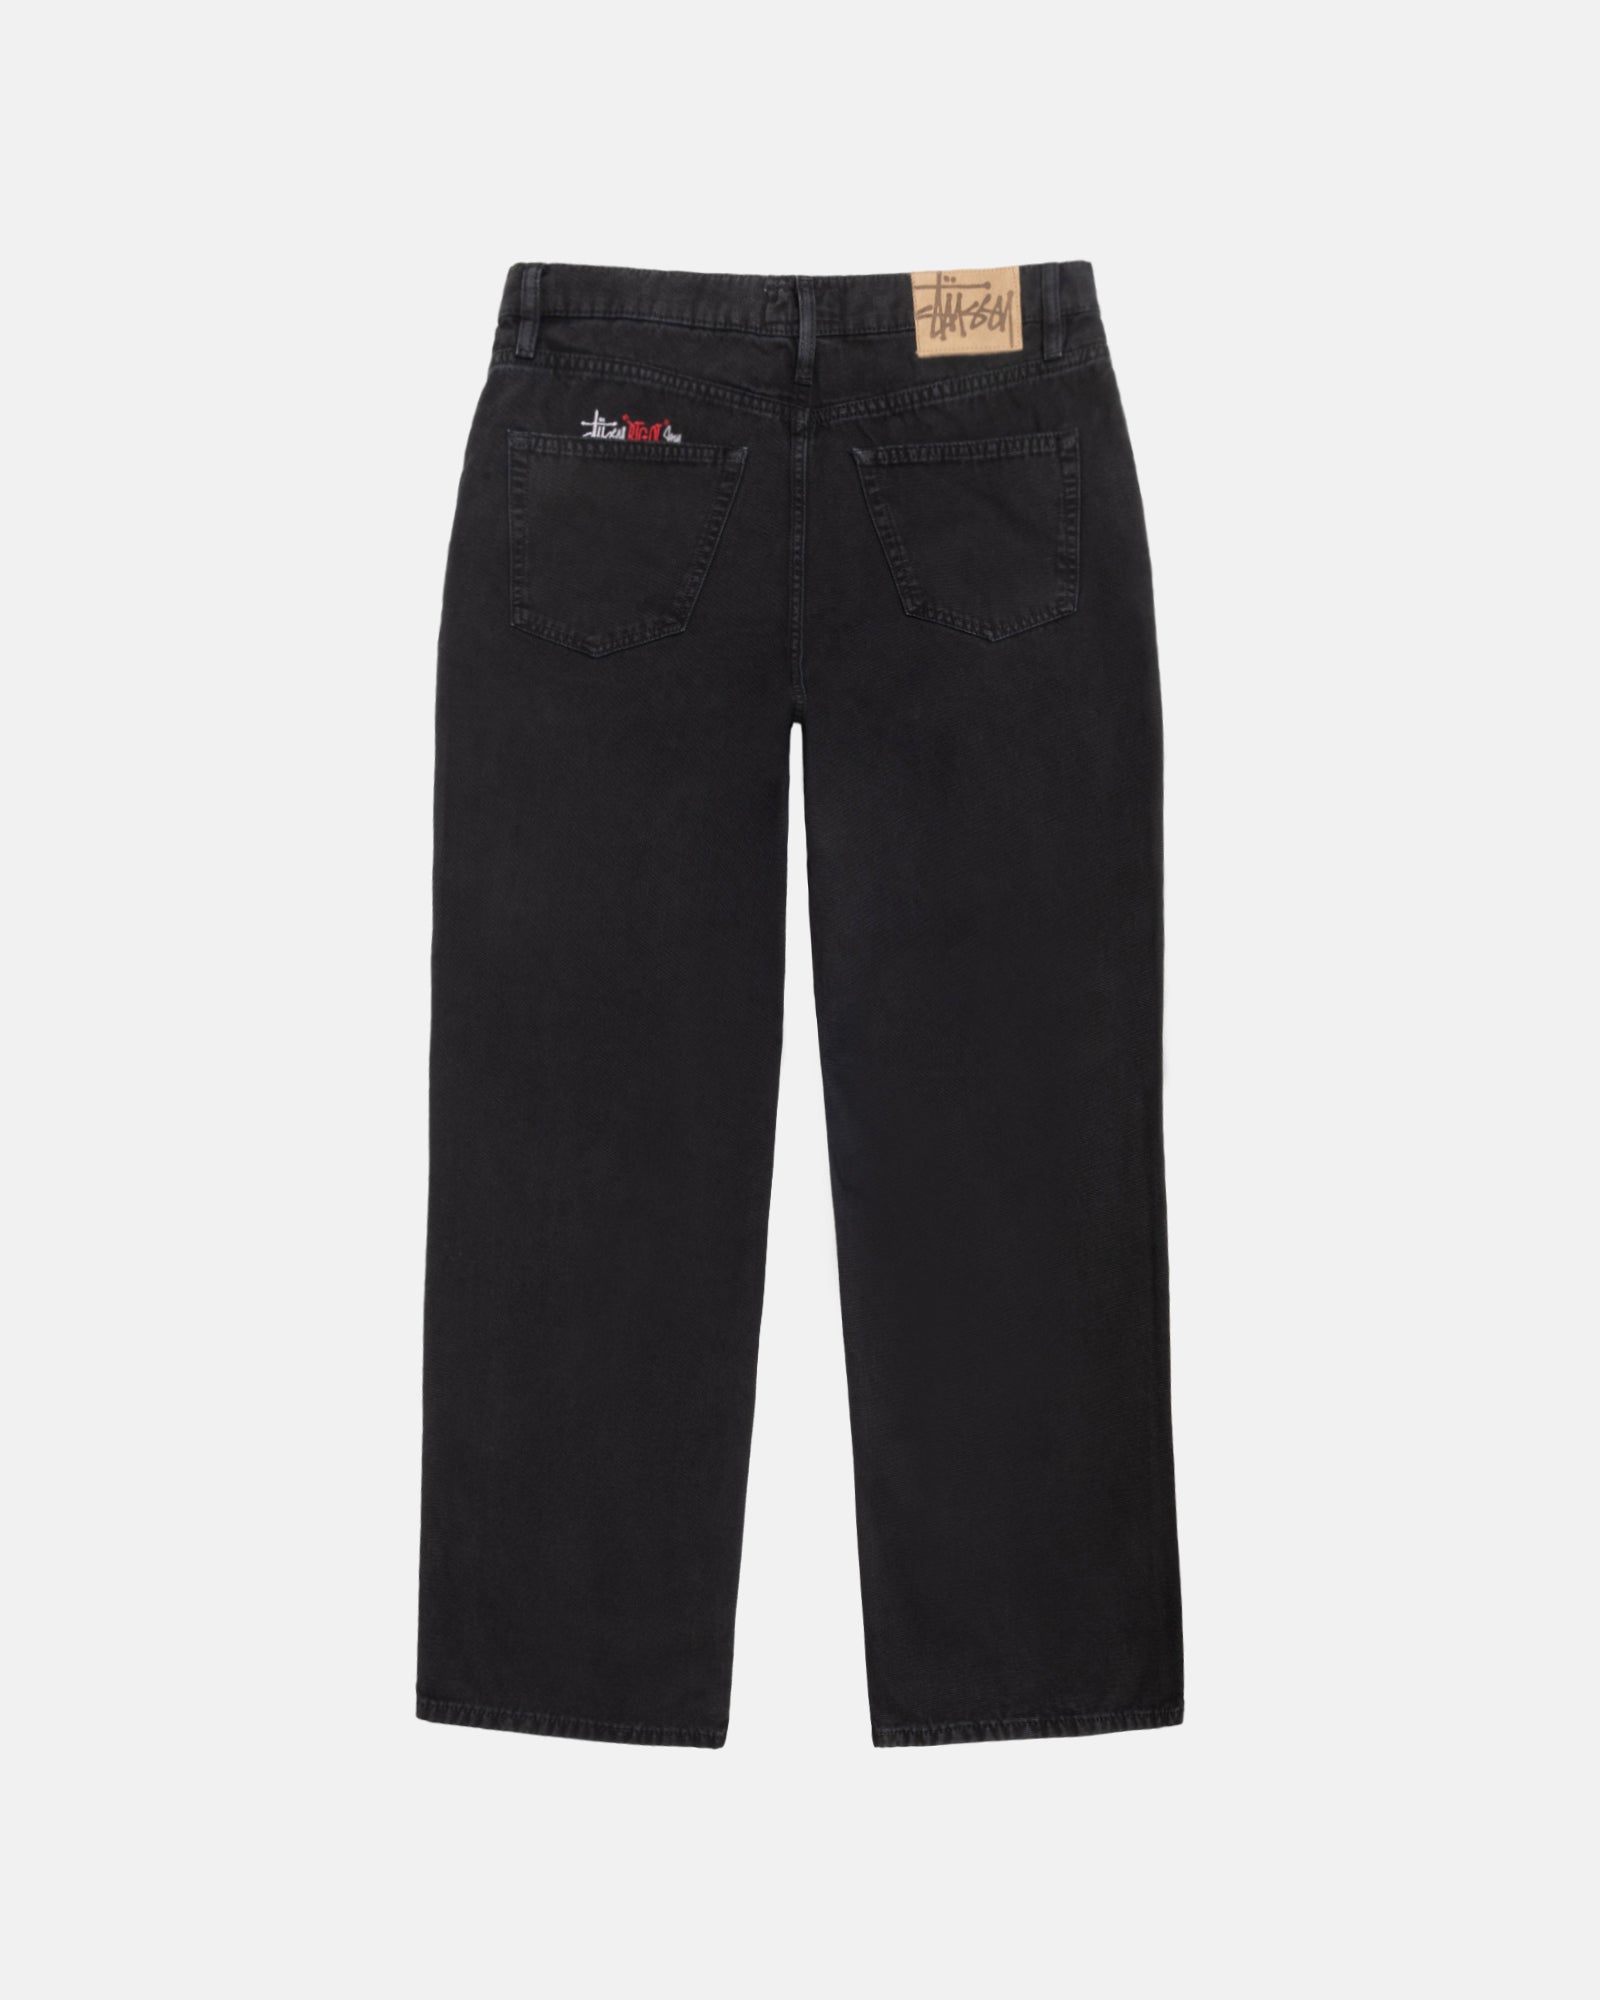 STÜSSY CLASSIC JEAN WASHED CANVAS Washed Black